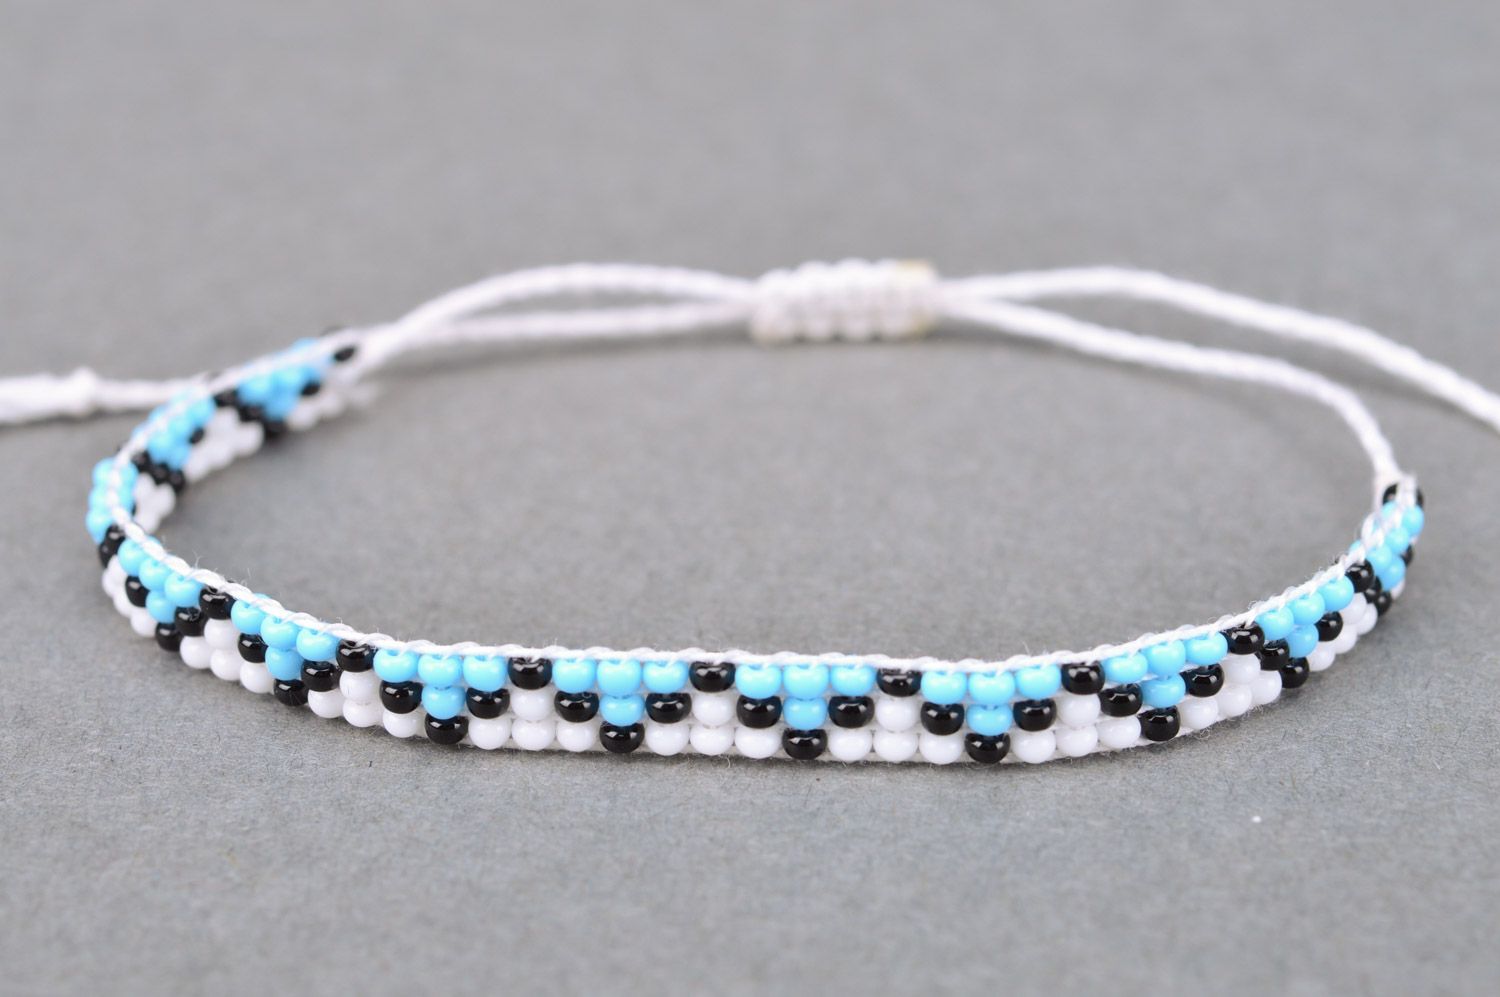 Handmade light thin wrist bracelet woven of beads and threads with ornament photo 5